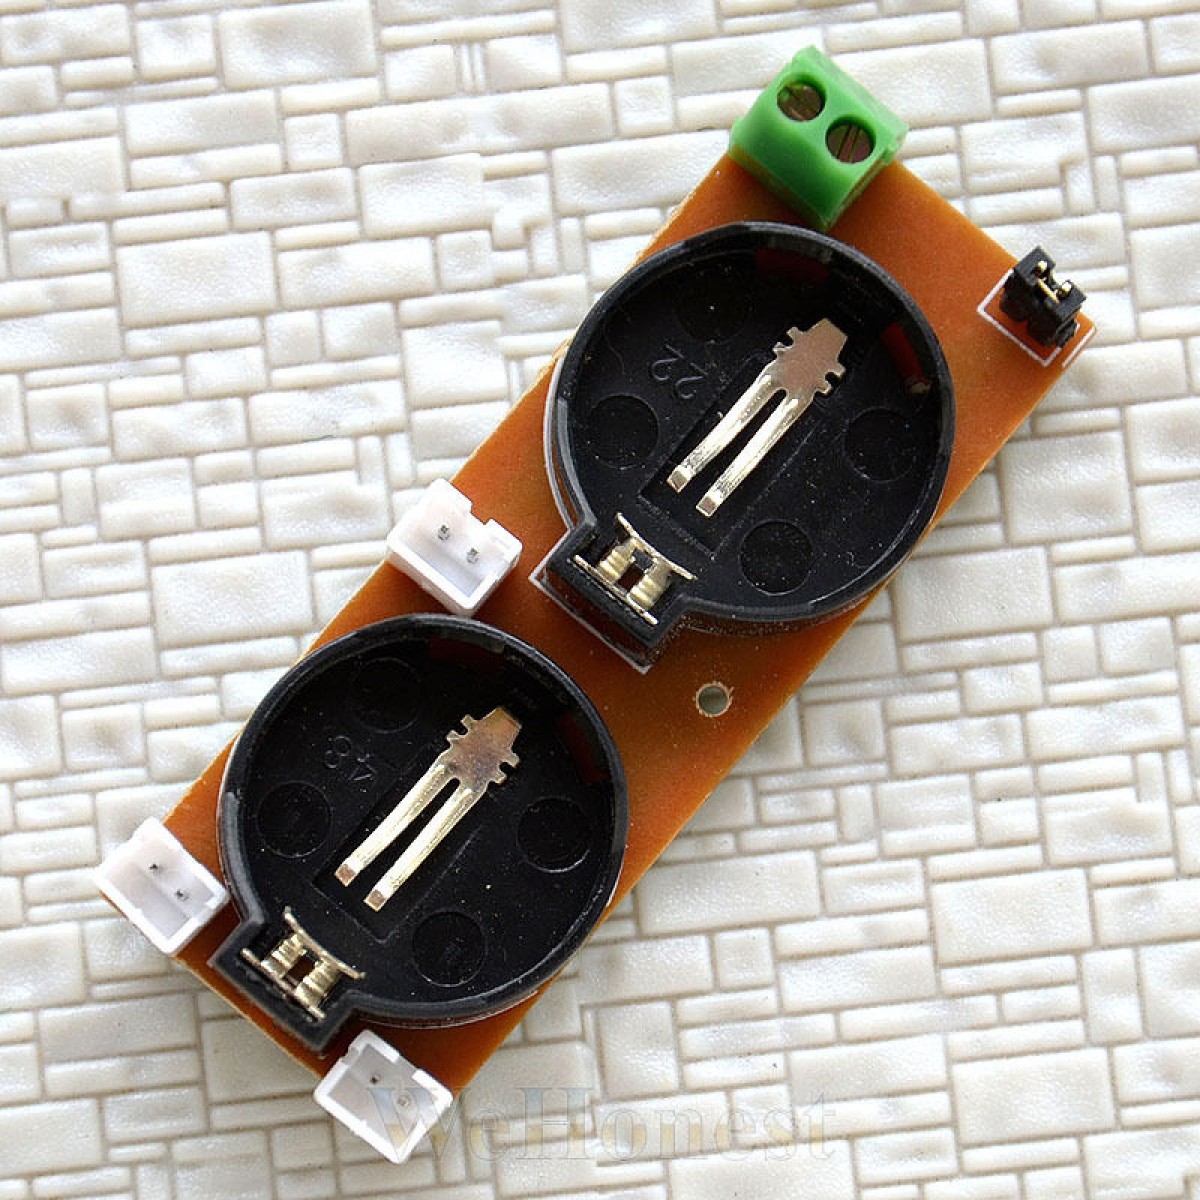 1 x Cell Battery Holder Circuit Board to have 6V or 3V output, install easily.